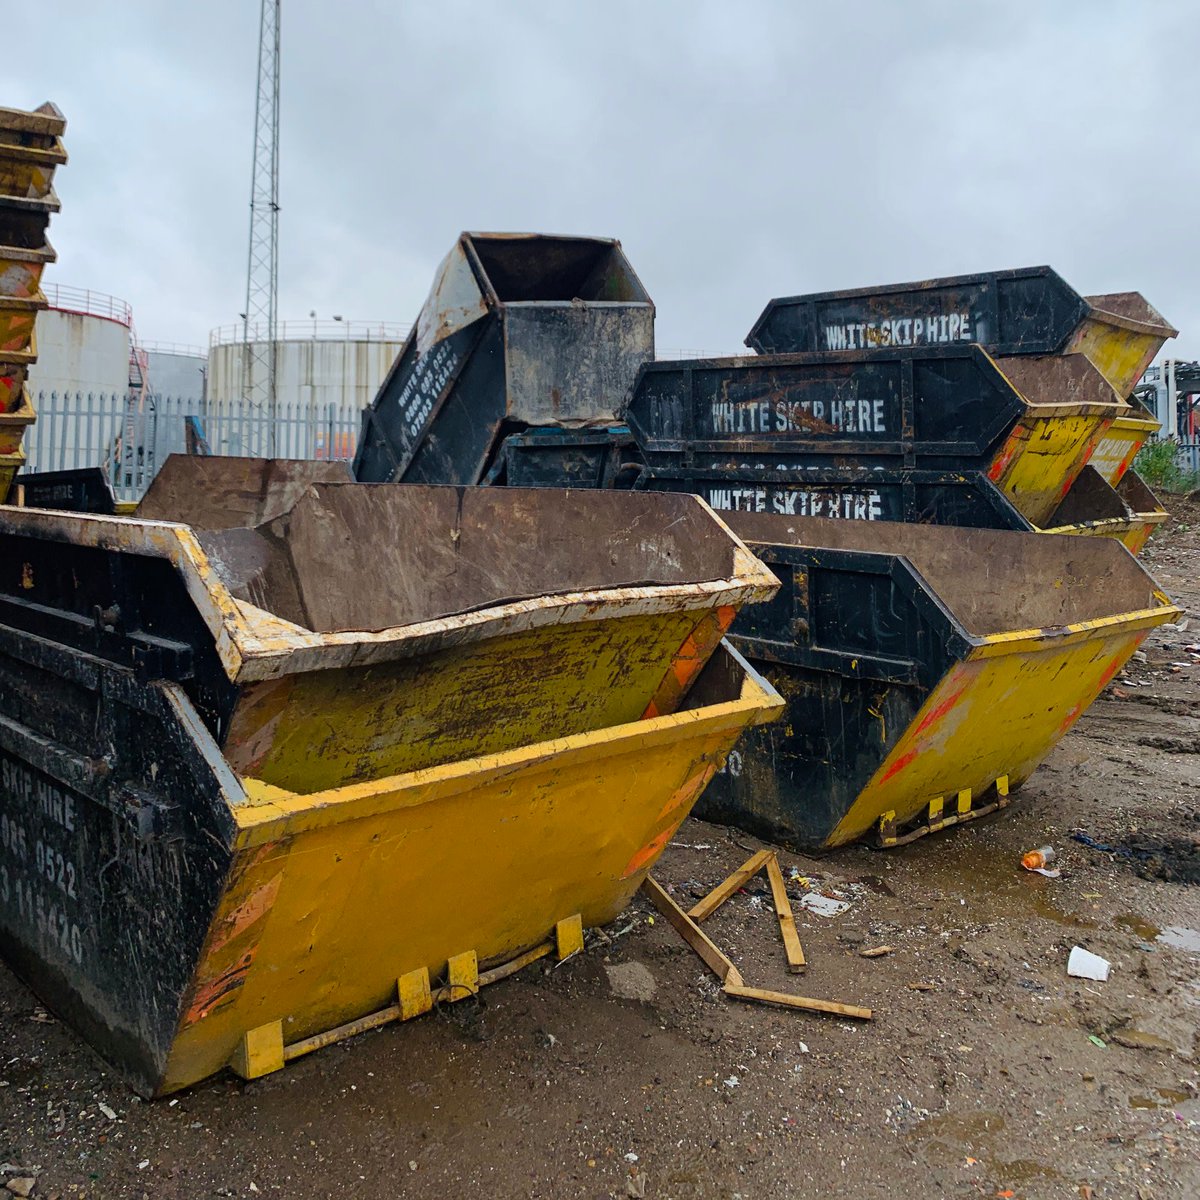 No problem is too big or too small. ✅

We offer a range of different-sized skips at White Skip Hire. 🚛

Head over to our website today to view our skip sizes for yourself. 🙌

👉 bit.ly/3wxjwsQ 💻

#WhiteSkipHire #SkipHire #SkipHireLondon #LondonConstruction